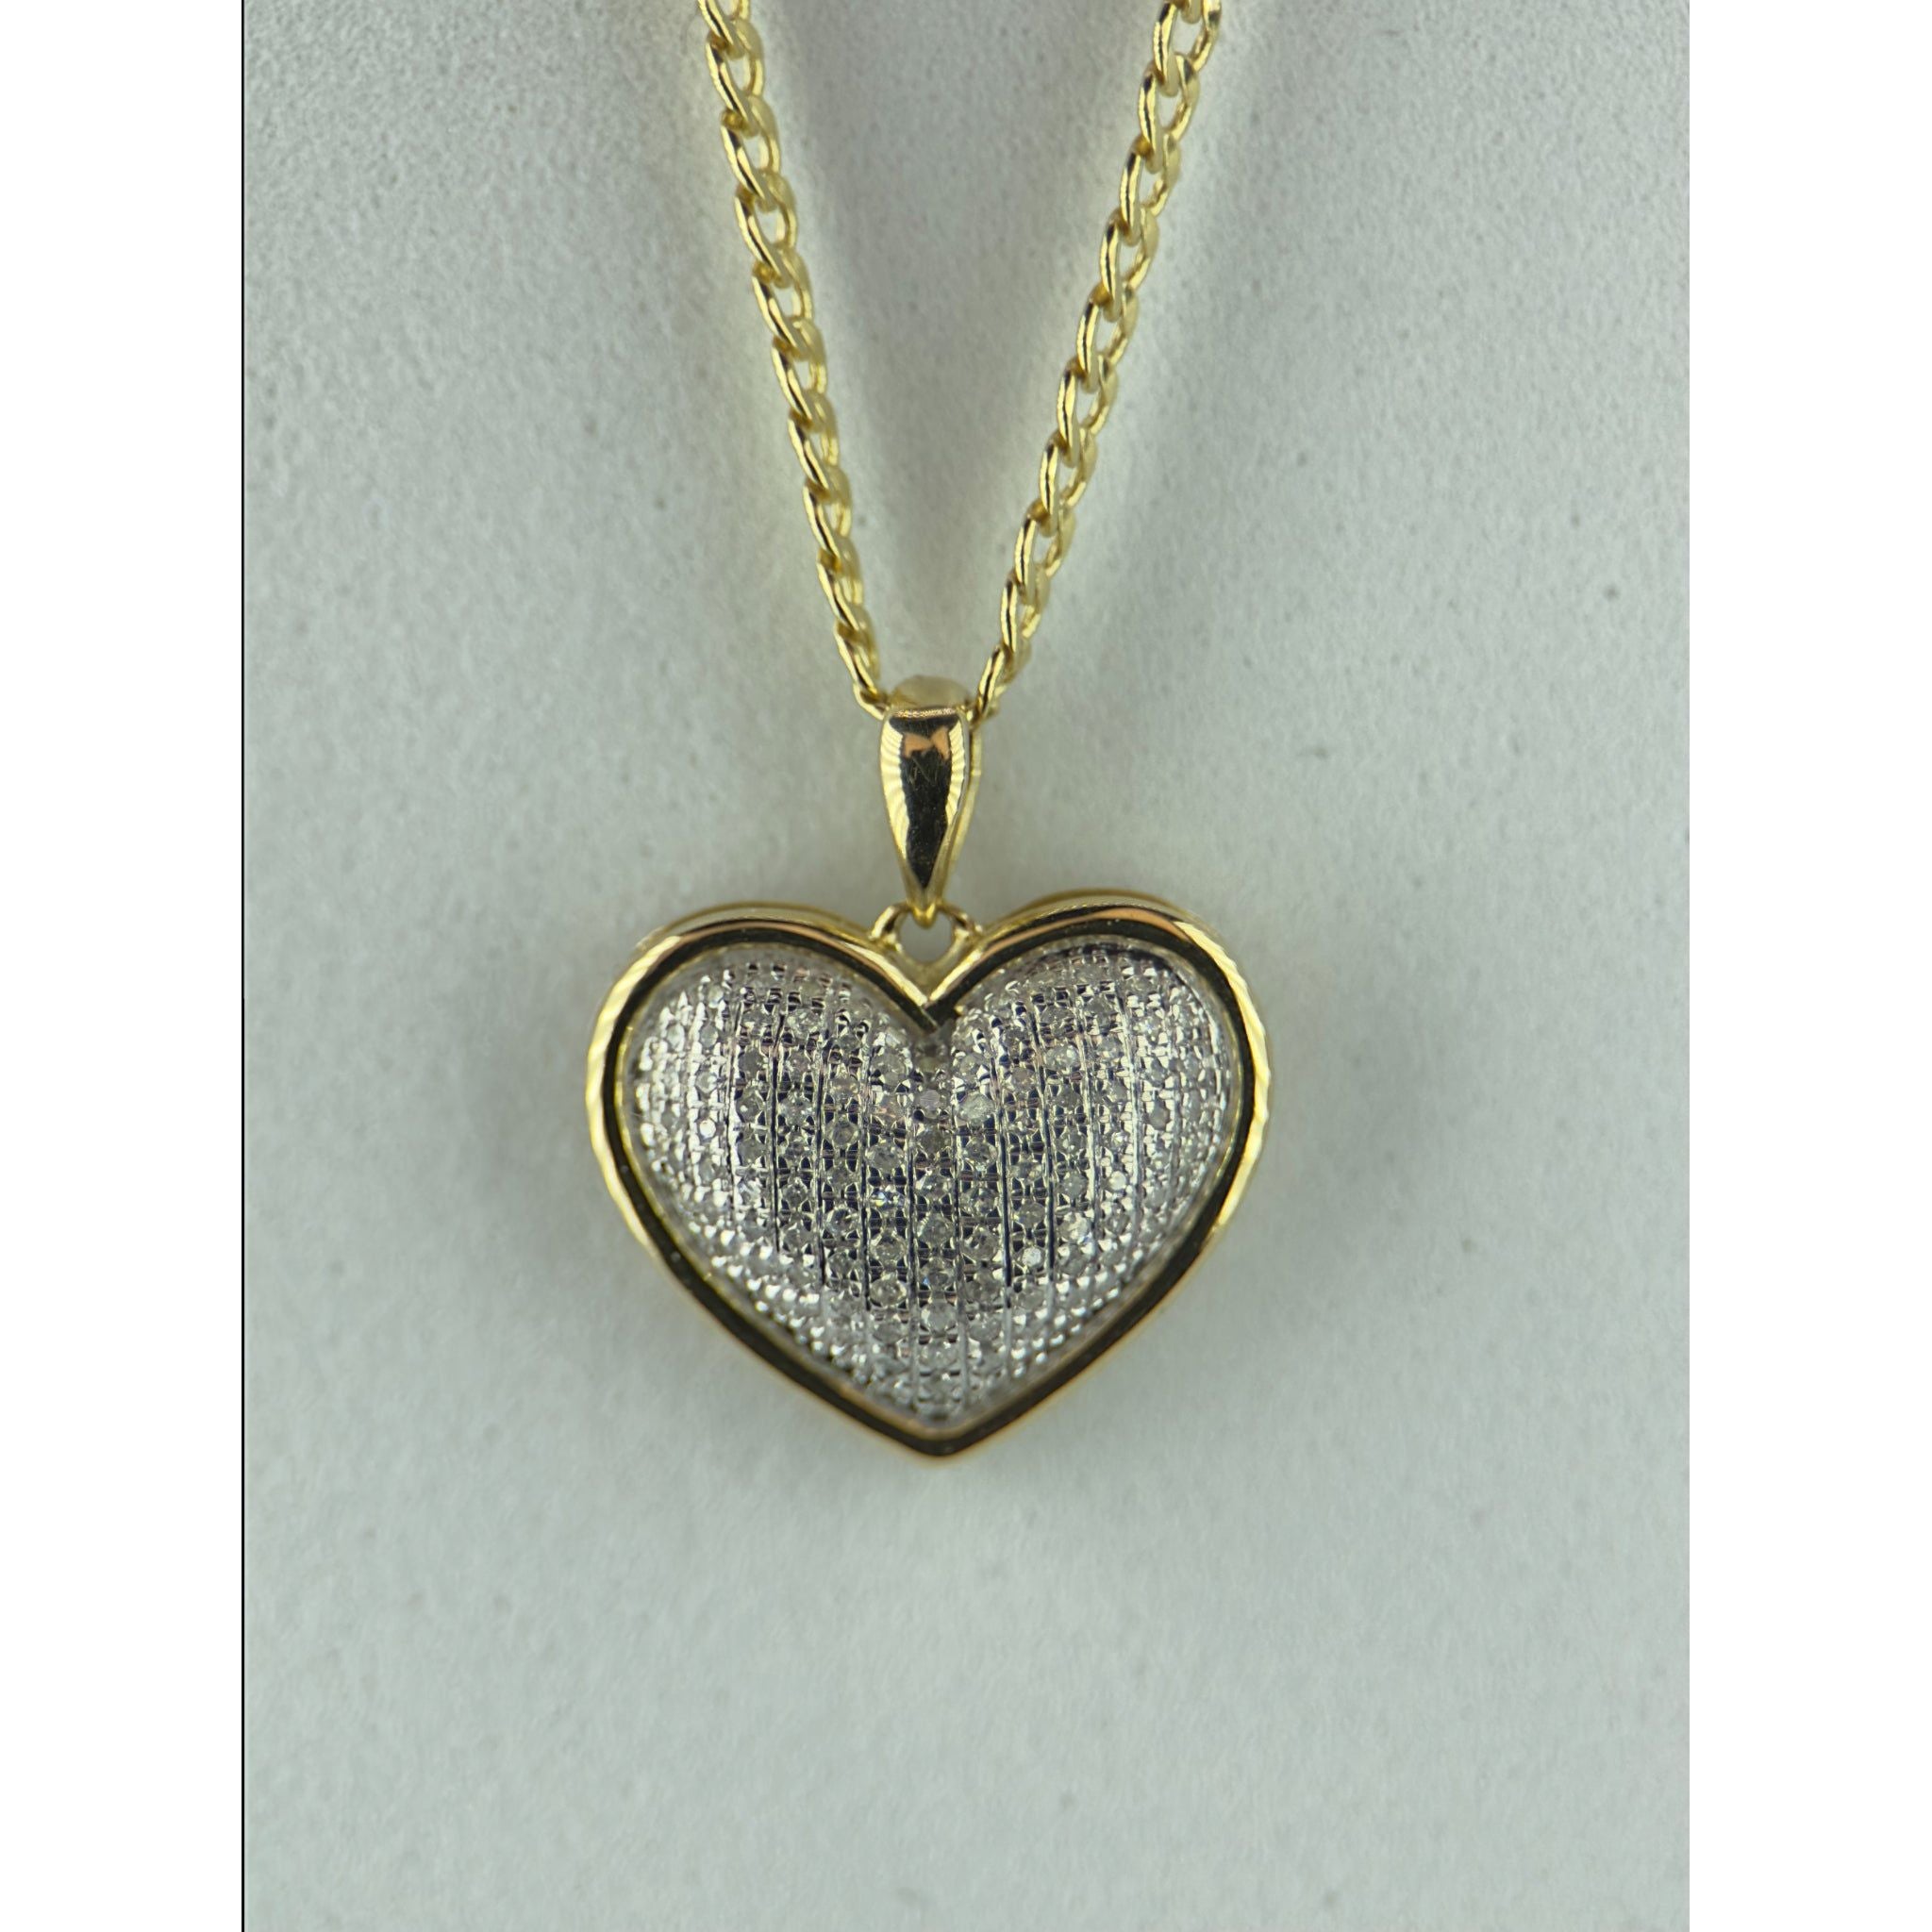 DR2207 - 10K Yellow Gold - Diamond - Pendant and Chain